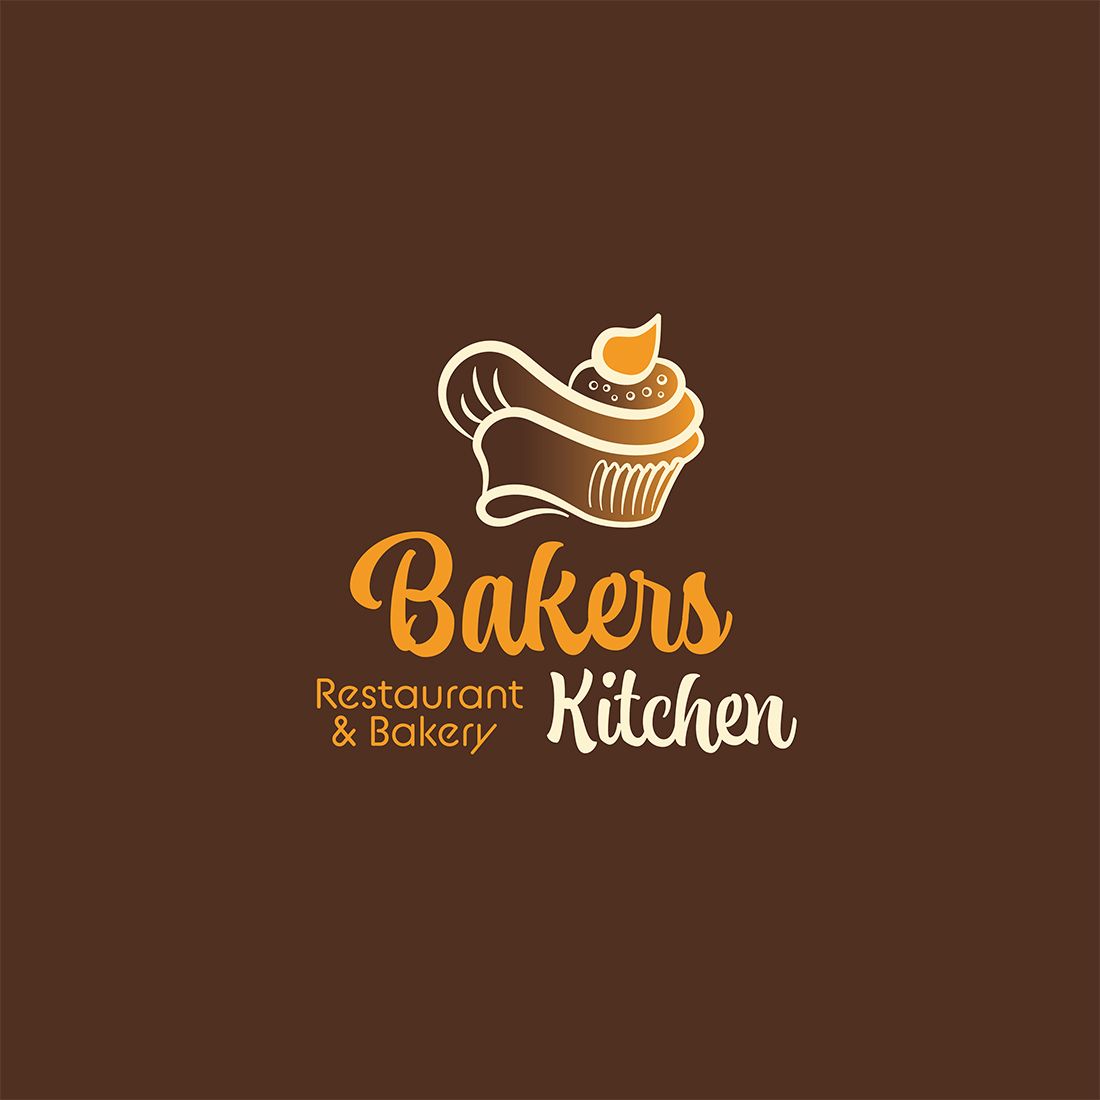 Bakers Kitchen Logo with brown background.